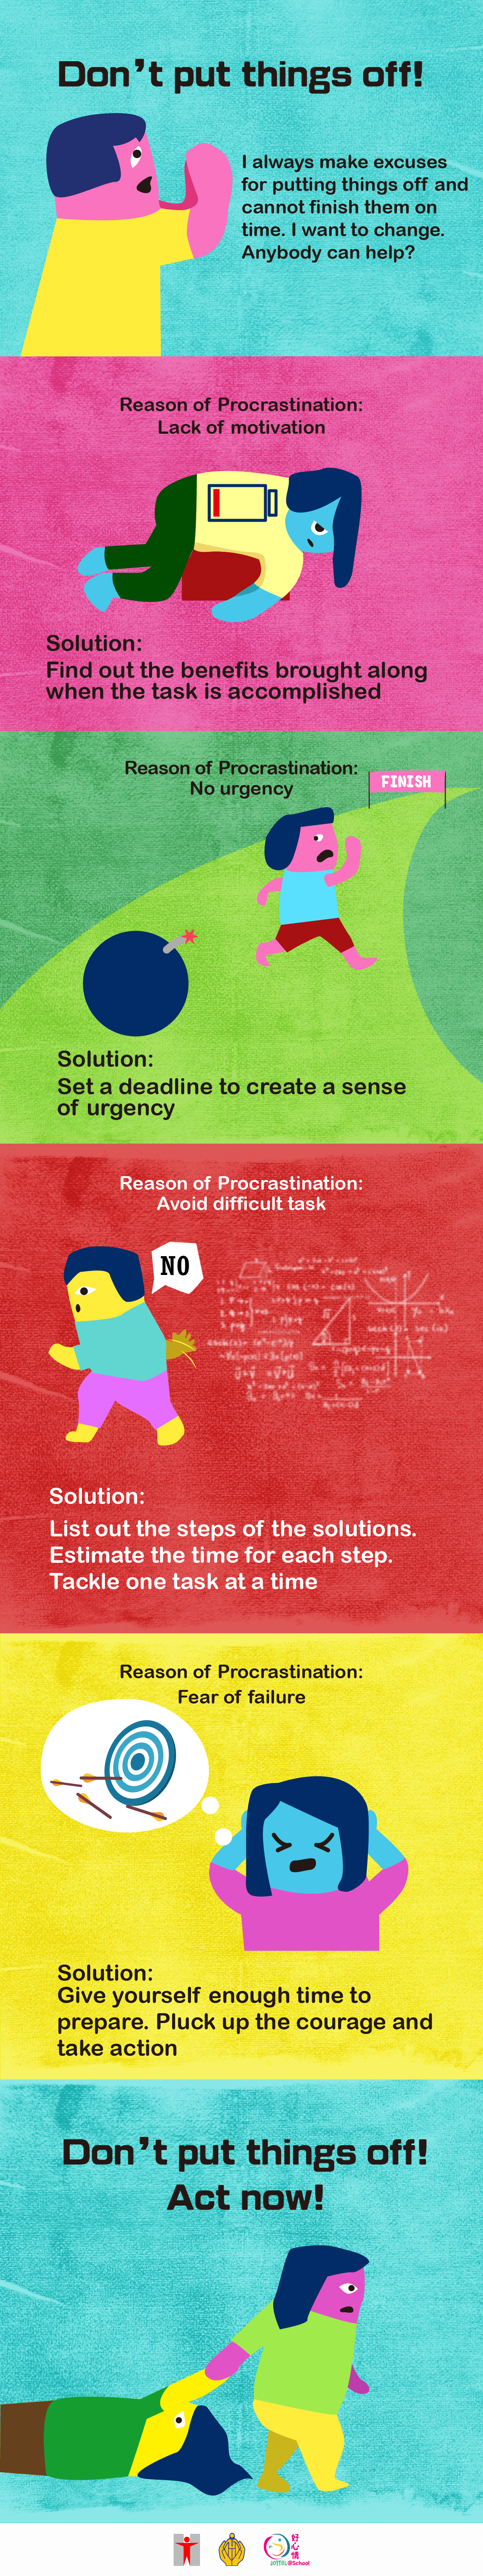 (Info-graphic) Don’t put things off!I always make excuses for putting things off and cannot finish them on time. I want to change. Anybody can help?Reason of Procrastination:Lack of motivation/Solution:Find out the benefits brought along when the task is accomplished/Reason of Procrastination:No urgency/Solution:Set a deadline to create a sense of urgency/Reason of Procrastination:Avoid difficult task/Solution:List out the steps of the solutions.Estimate the time for each step.Tackle one task at a time/Reason of Procrastination:Fear of failure/Solution:Give yourself enough time to prepare. Pluck up the courage and take action/Don’t put things off!Act now!